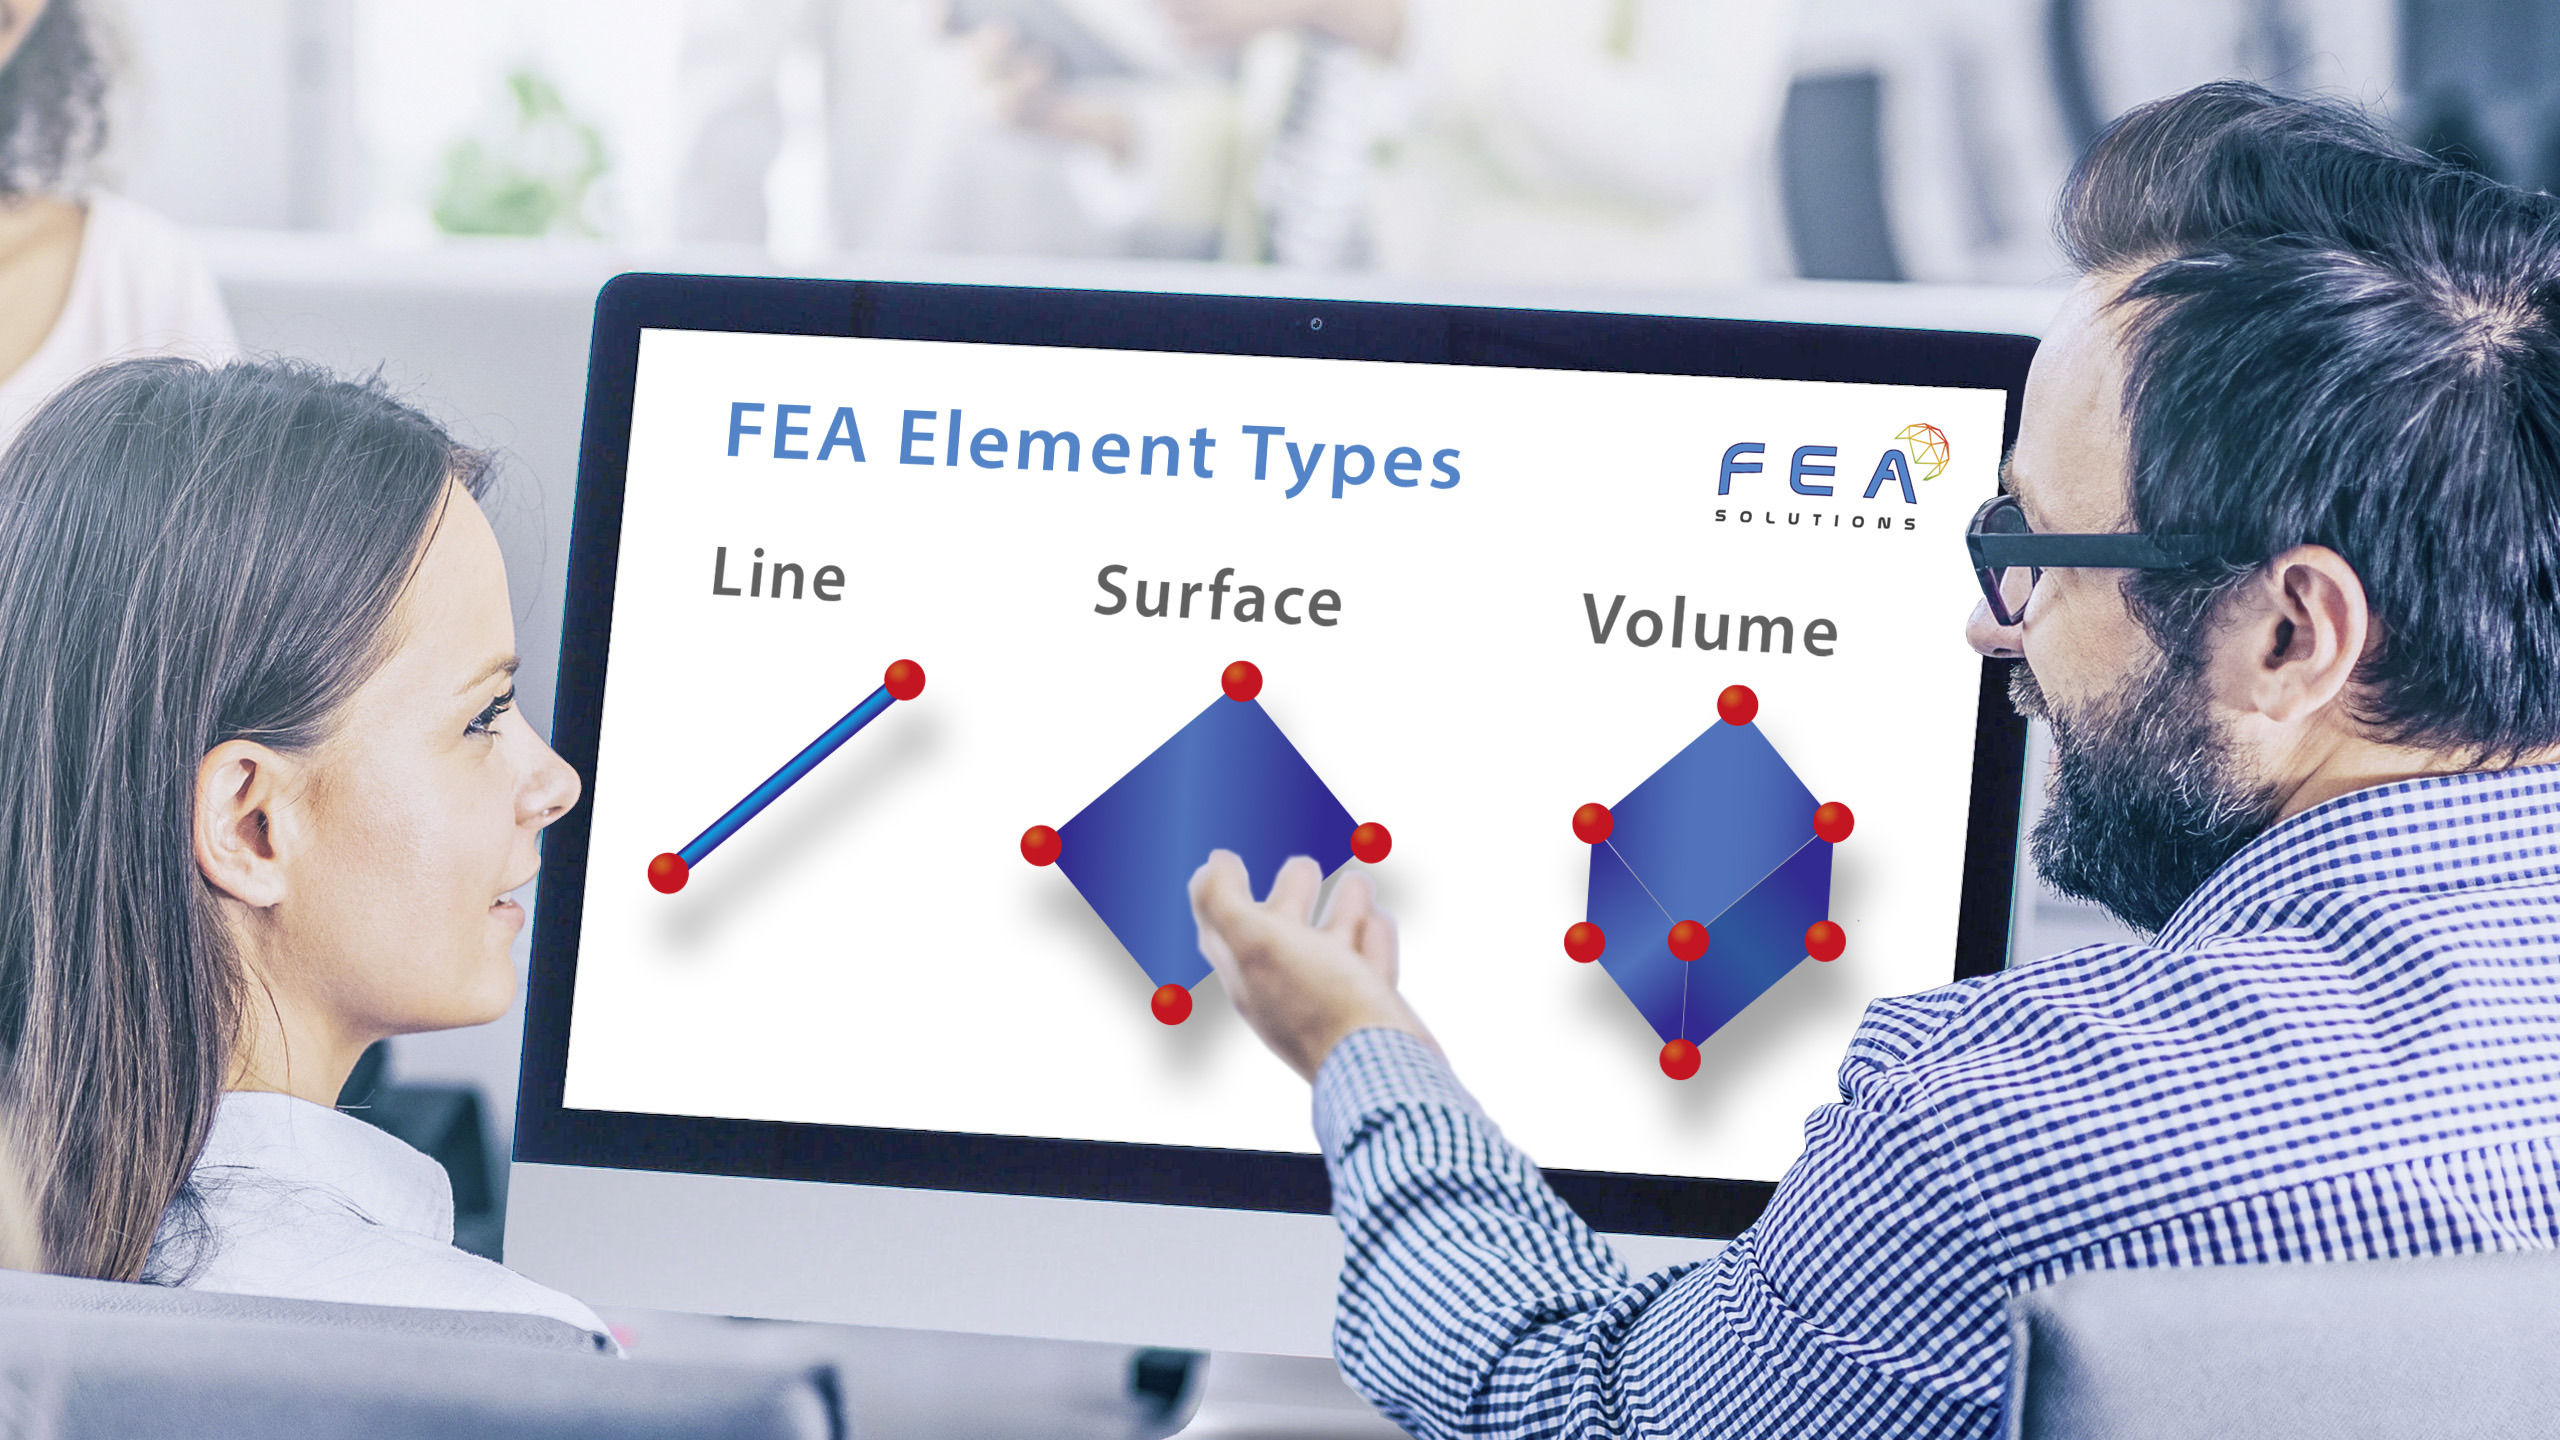 fea element types infographic